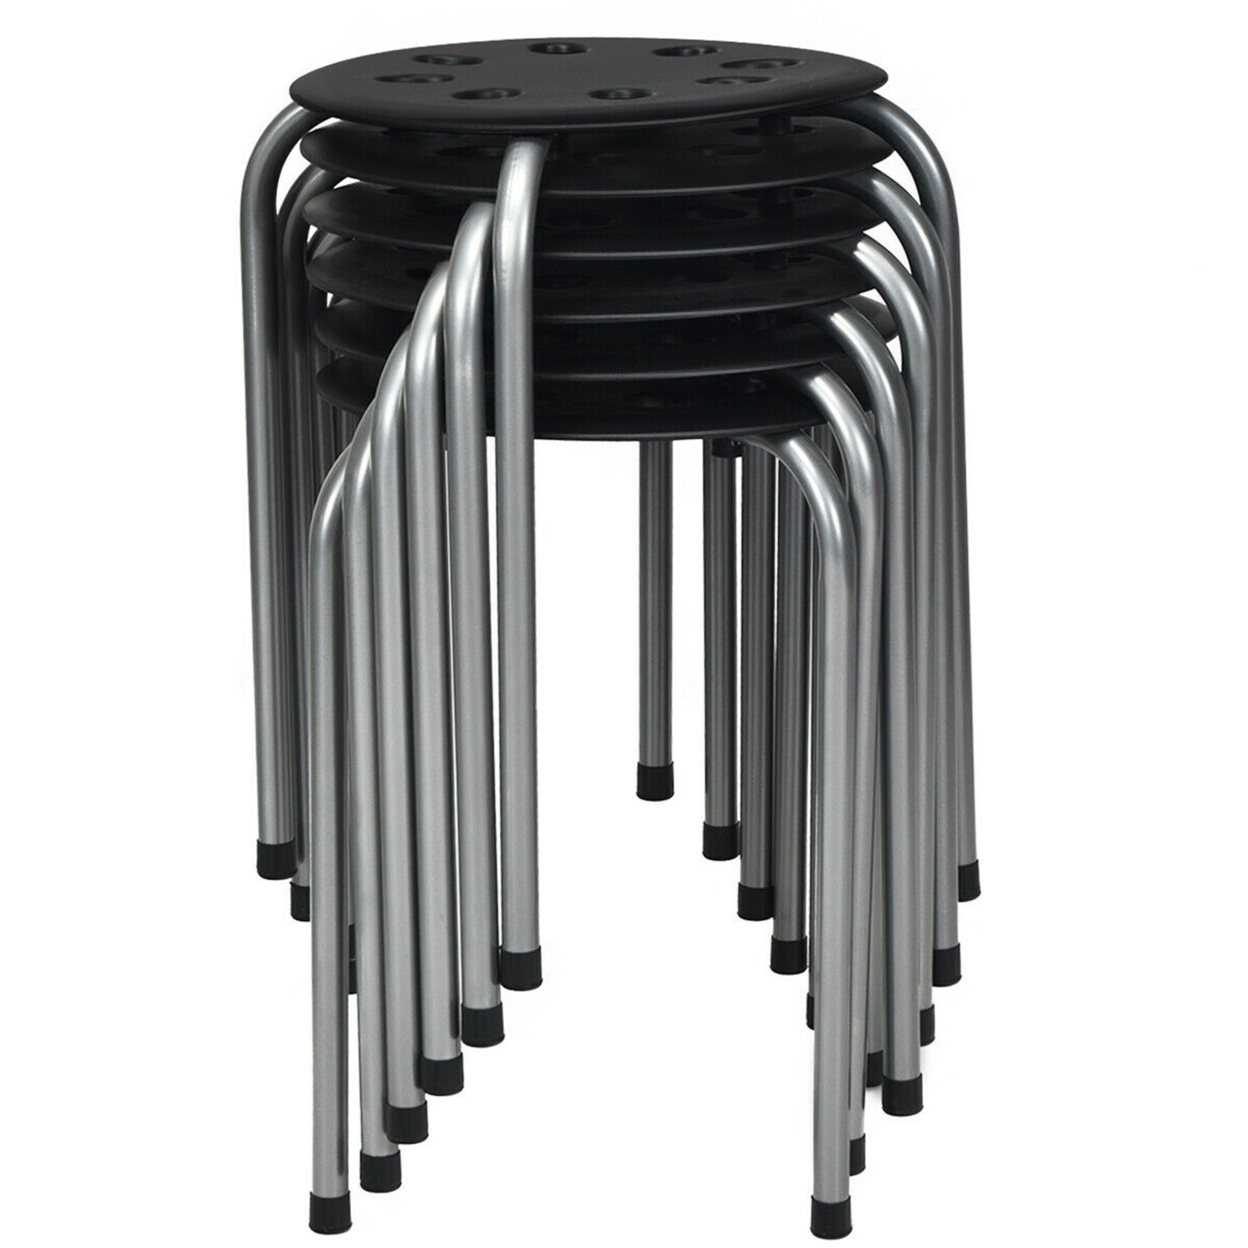 Set Of 6 Portable Plastic Stack Stools Backless Classroom Seating - Black + Gray